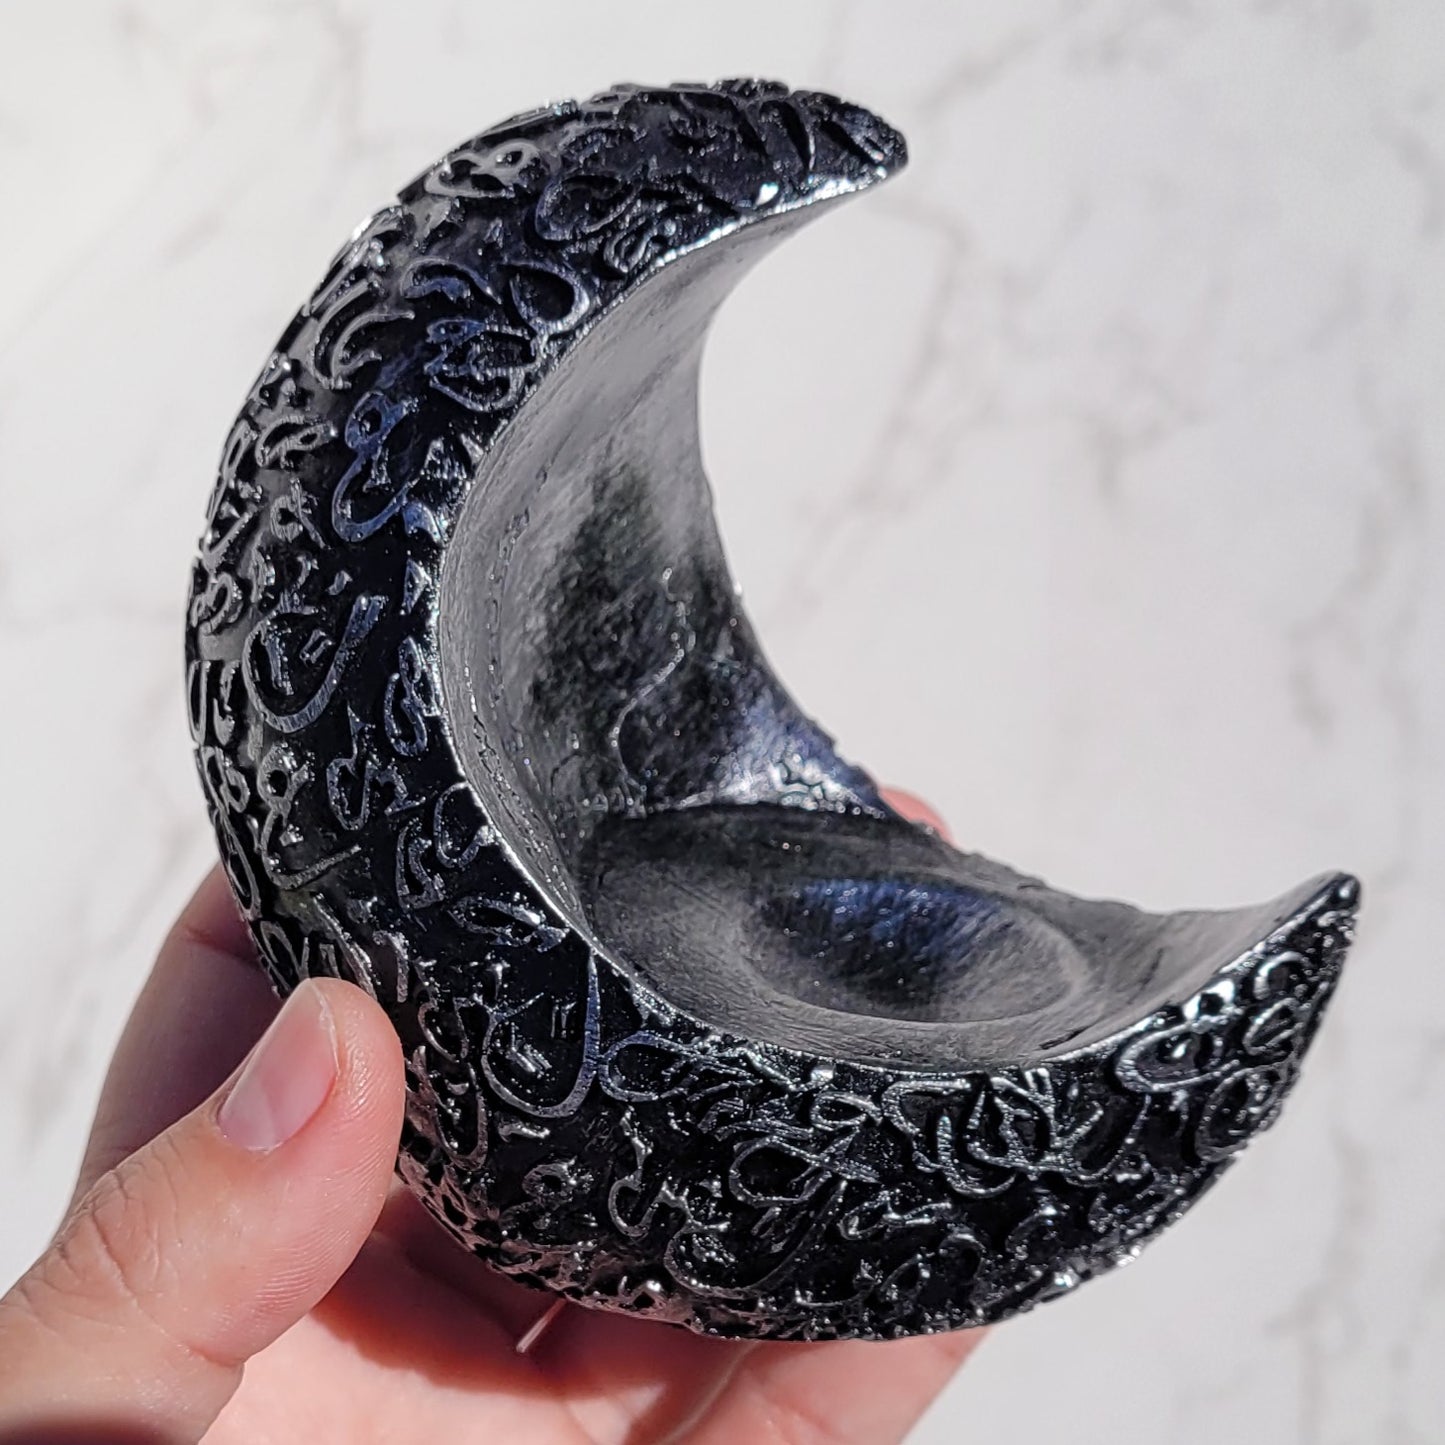 Black Moon Sphere Display Stand with Silver Trim, for Crystal Balls or Eggs 1.3" to 2.6" (35mm to 66mm)